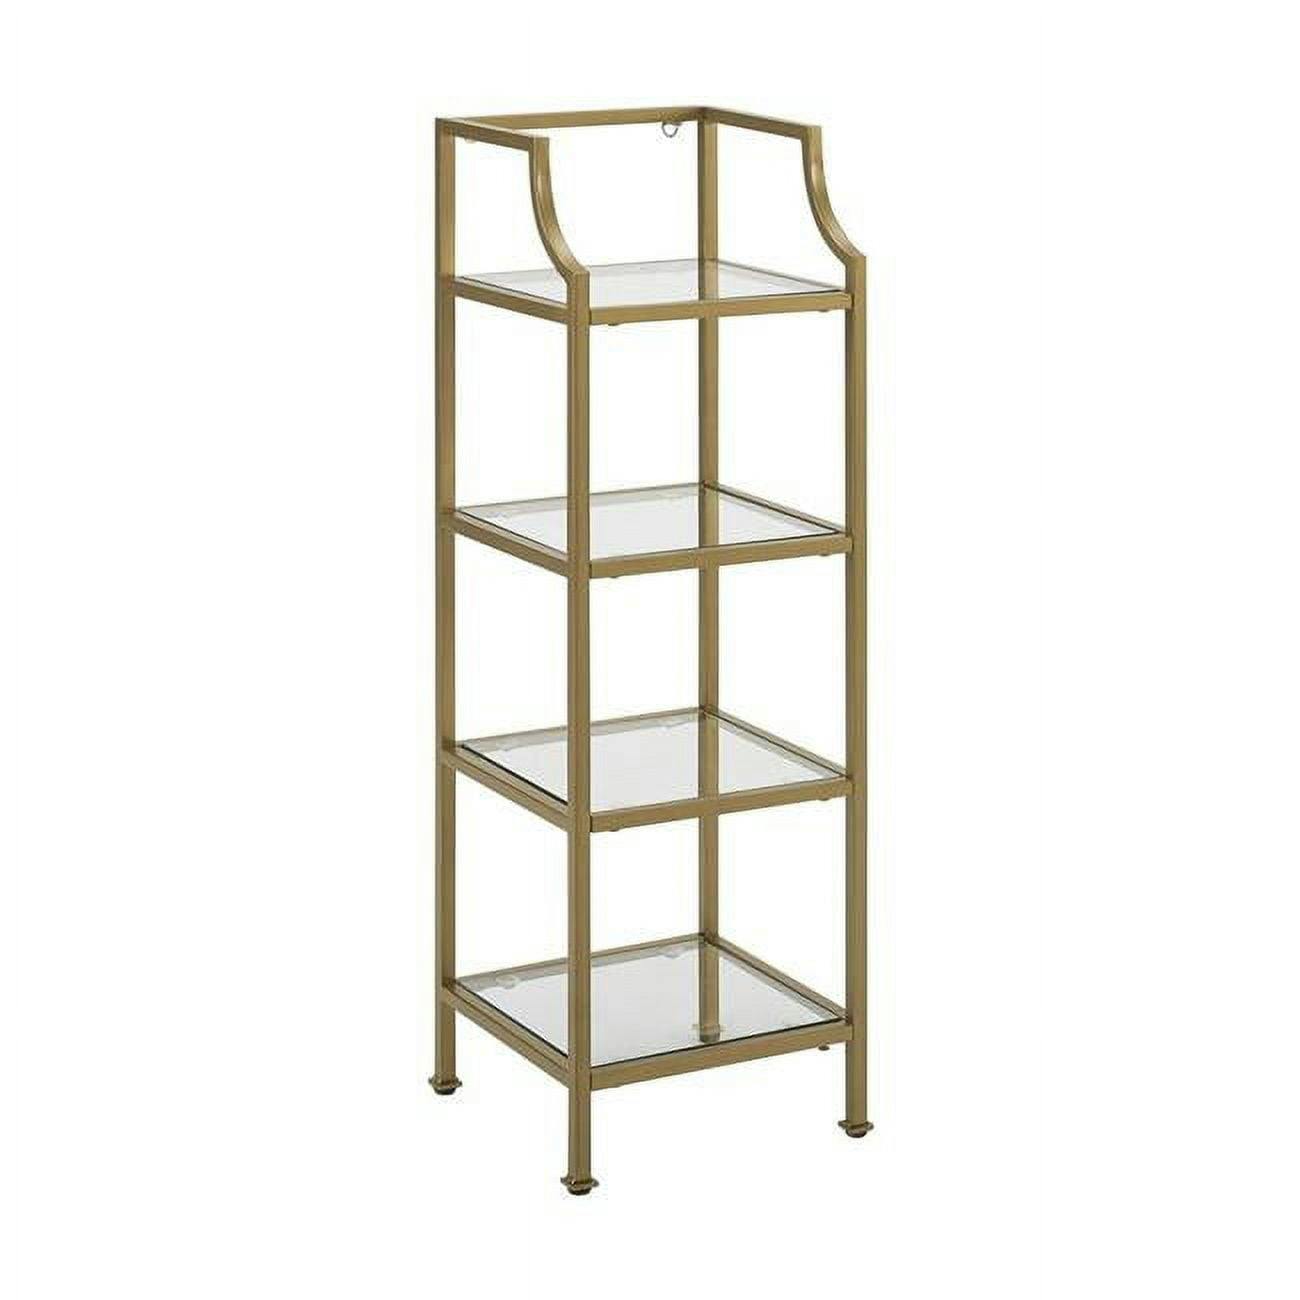 Sleek Soft Gold Steel and Glass 44" Short Etagere for Books